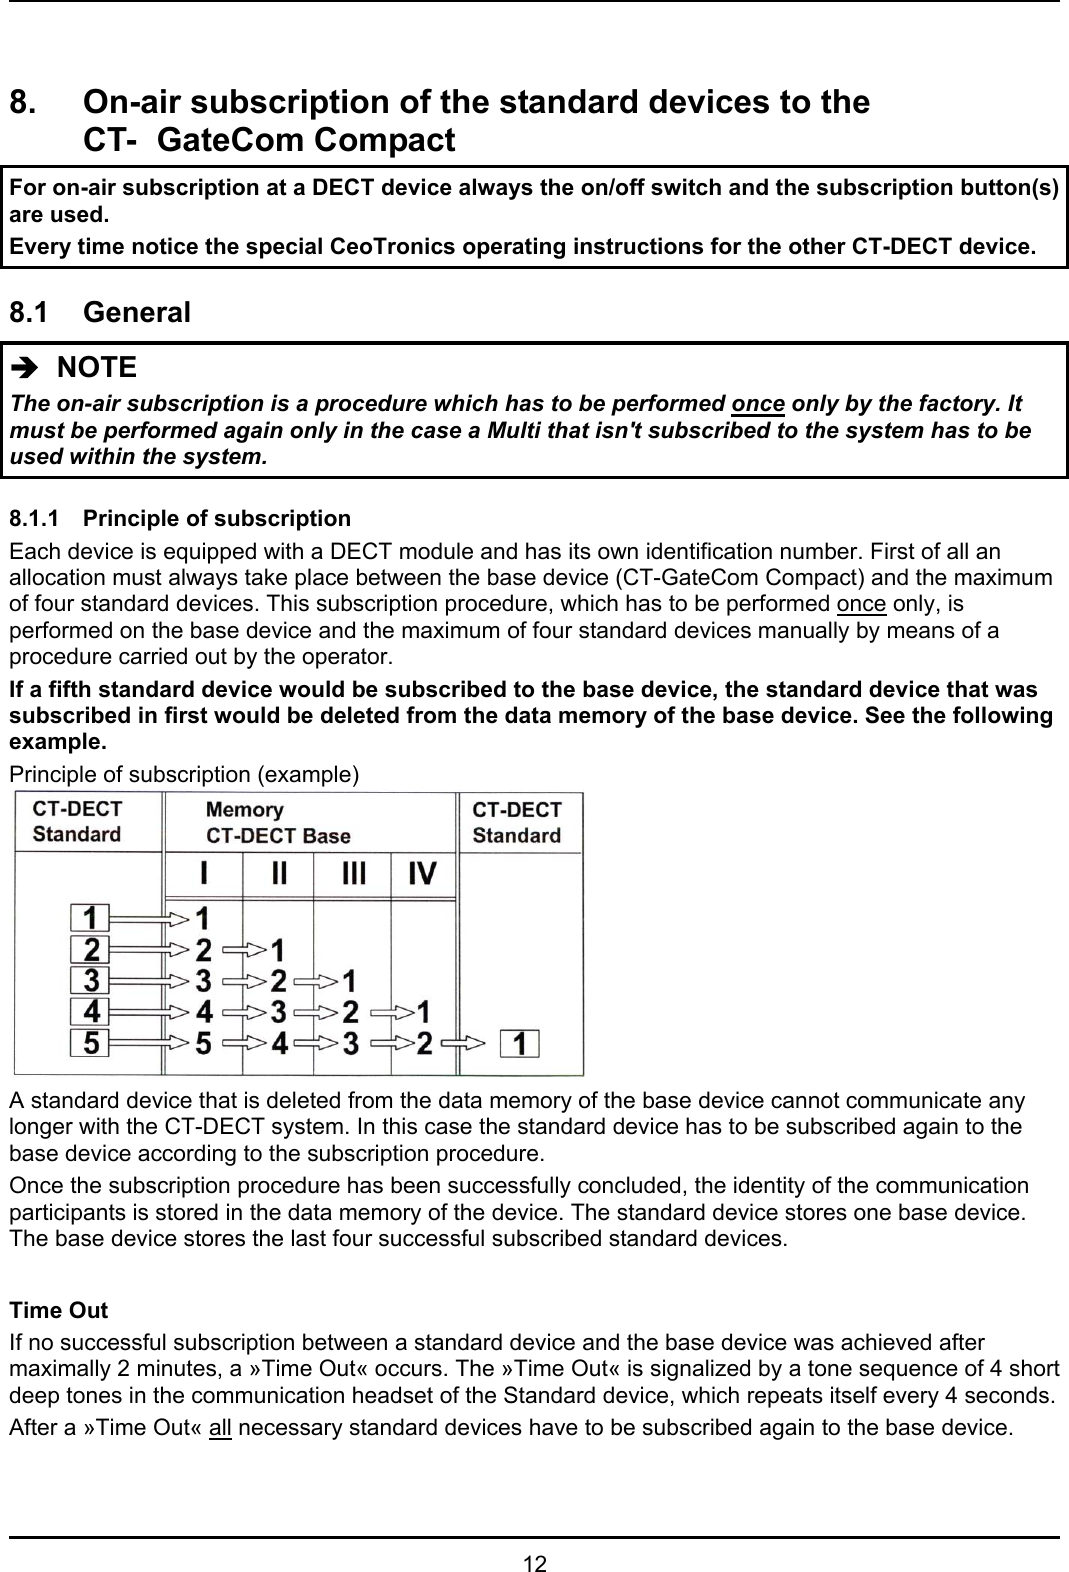   12  8.  On-air subscription of the standard devices to the   CT- GateCom Compact For on-air subscription at a DECT device always the on/off switch and the subscription button(s) are used. Every time notice the special CeoTronics operating instructions for the other CT-DECT device.  8.1 General Î  NOTE The on-air subscription is a procedure which has to be performed once only by the factory. It must be performed again only in the case a Multi that isn&apos;t subscribed to the system has to be used within the system.   8.1.1  Principle of subscription Each device is equipped with a DECT module and has its own identification number. First of all an allocation must always take place between the base device (CT-GateCom Compact) and the maximum of four standard devices. This subscription procedure, which has to be performed once only, is performed on the base device and the maximum of four standard devices manually by means of a procedure carried out by the operator. If a fifth standard device would be subscribed to the base device, the standard device that was subscribed in first would be deleted from the data memory of the base device. See the following example. Principle of subscription (example)          A standard device that is deleted from the data memory of the base device cannot communicate any longer with the CT-DECT system. In this case the standard device has to be subscribed again to the base device according to the subscription procedure. Once the subscription procedure has been successfully concluded, the identity of the communication participants is stored in the data memory of the device. The standard device stores one base device. The base device stores the last four successful subscribed standard devices.  Time Out If no successful subscription between a standard device and the base device was achieved after maximally 2 minutes, a »Time Out« occurs. The »Time Out« is signalized by a tone sequence of 4 short deep tones in the communication headset of the Standard device, which repeats itself every 4 seconds.  After a »Time Out« all necessary standard devices have to be subscribed again to the base device.  